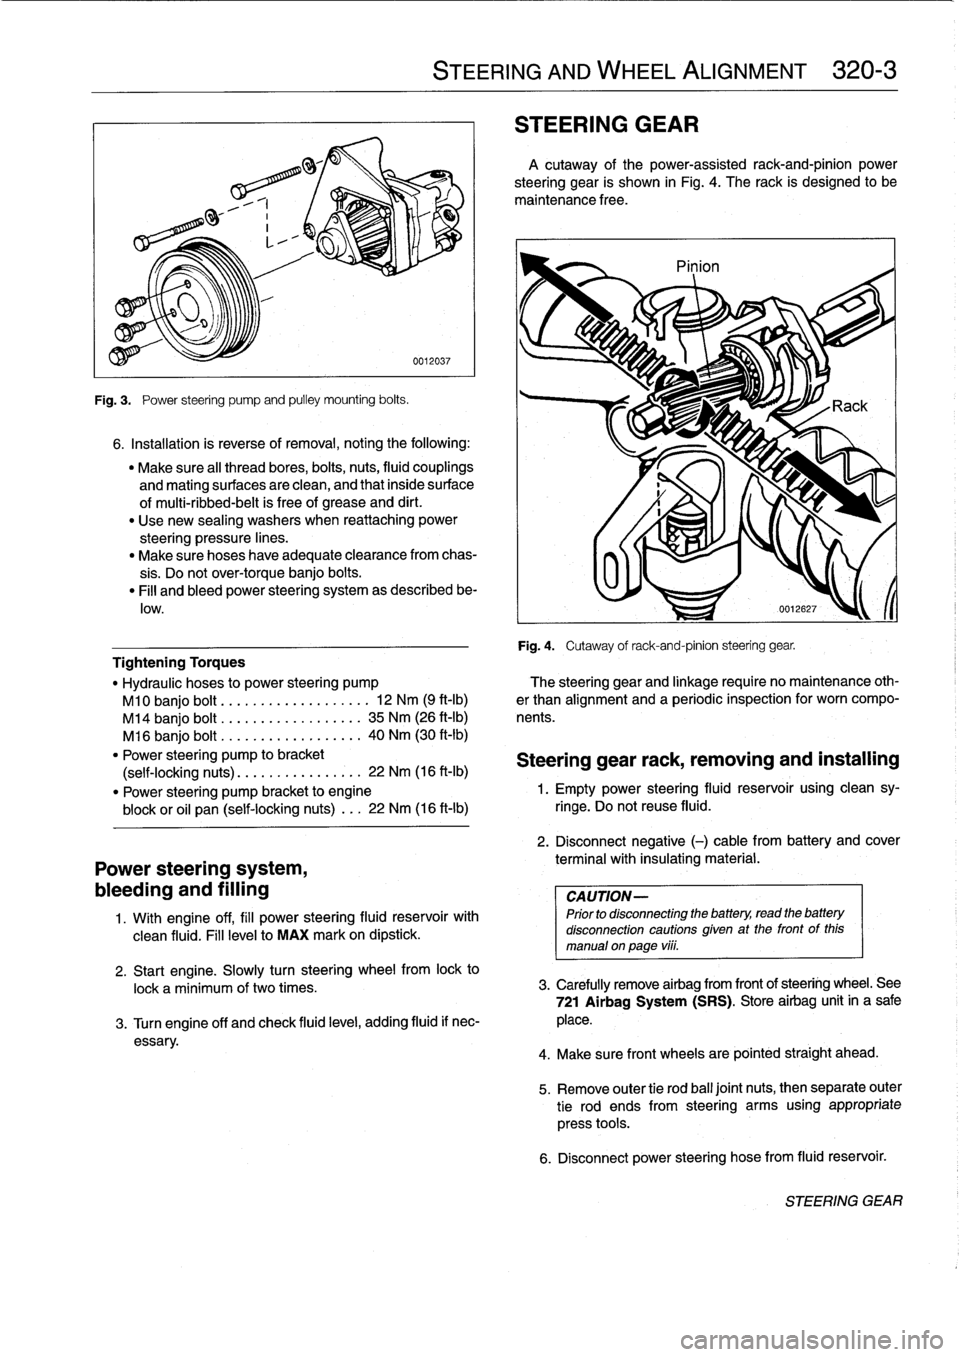 BMW 323i 1995 E36 Workshop Manual 
Fig
.
3
.

	

Power
steering
pump
and
pulley
mounting
bolts
.

6
.
Installation
is
reverse
of
removal,
noting
the
following
:

"
Make
sure
al¡
thread
bores,
bolts,
nuts,
fluid
couplings

and
mating
